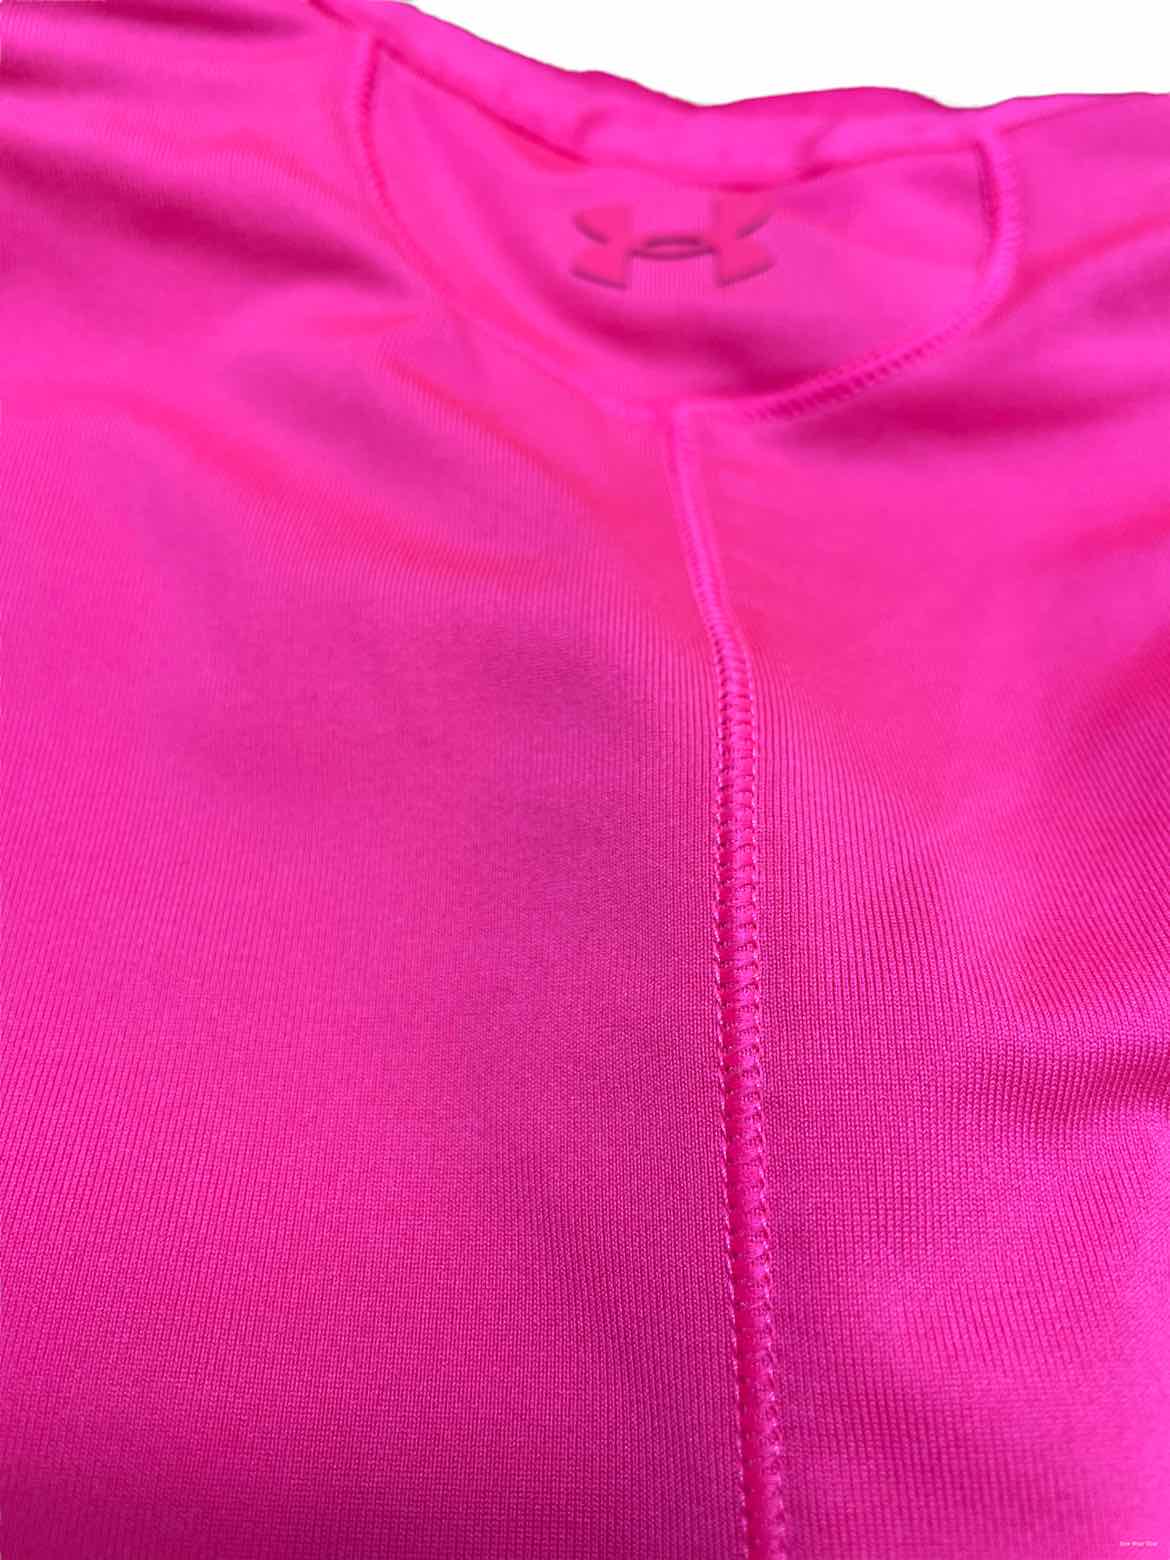 Under Armour Size S Neon Pink Polyester logo Active Wear Shirt